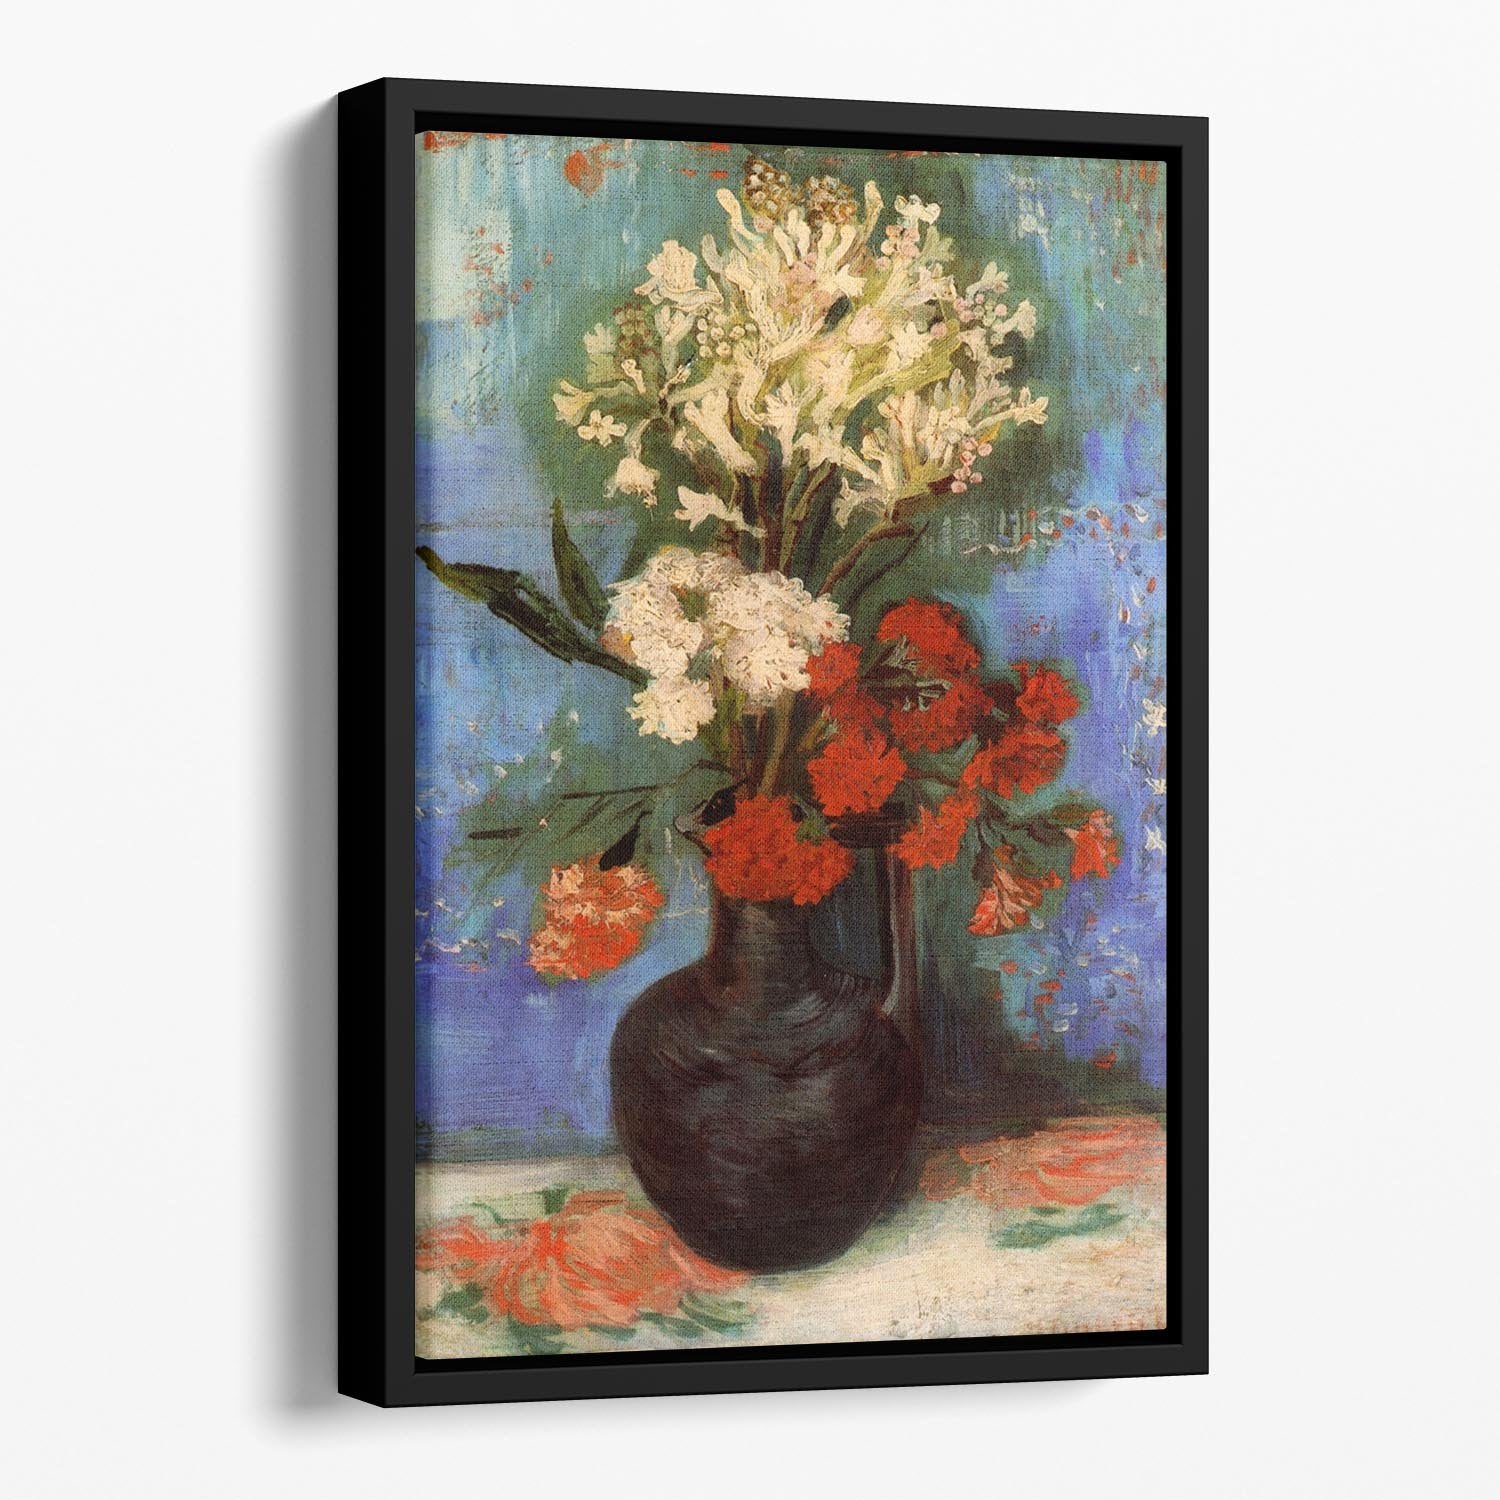 Vase with Carnations and Other Flowers by Van Gogh Floating Framed Canvas